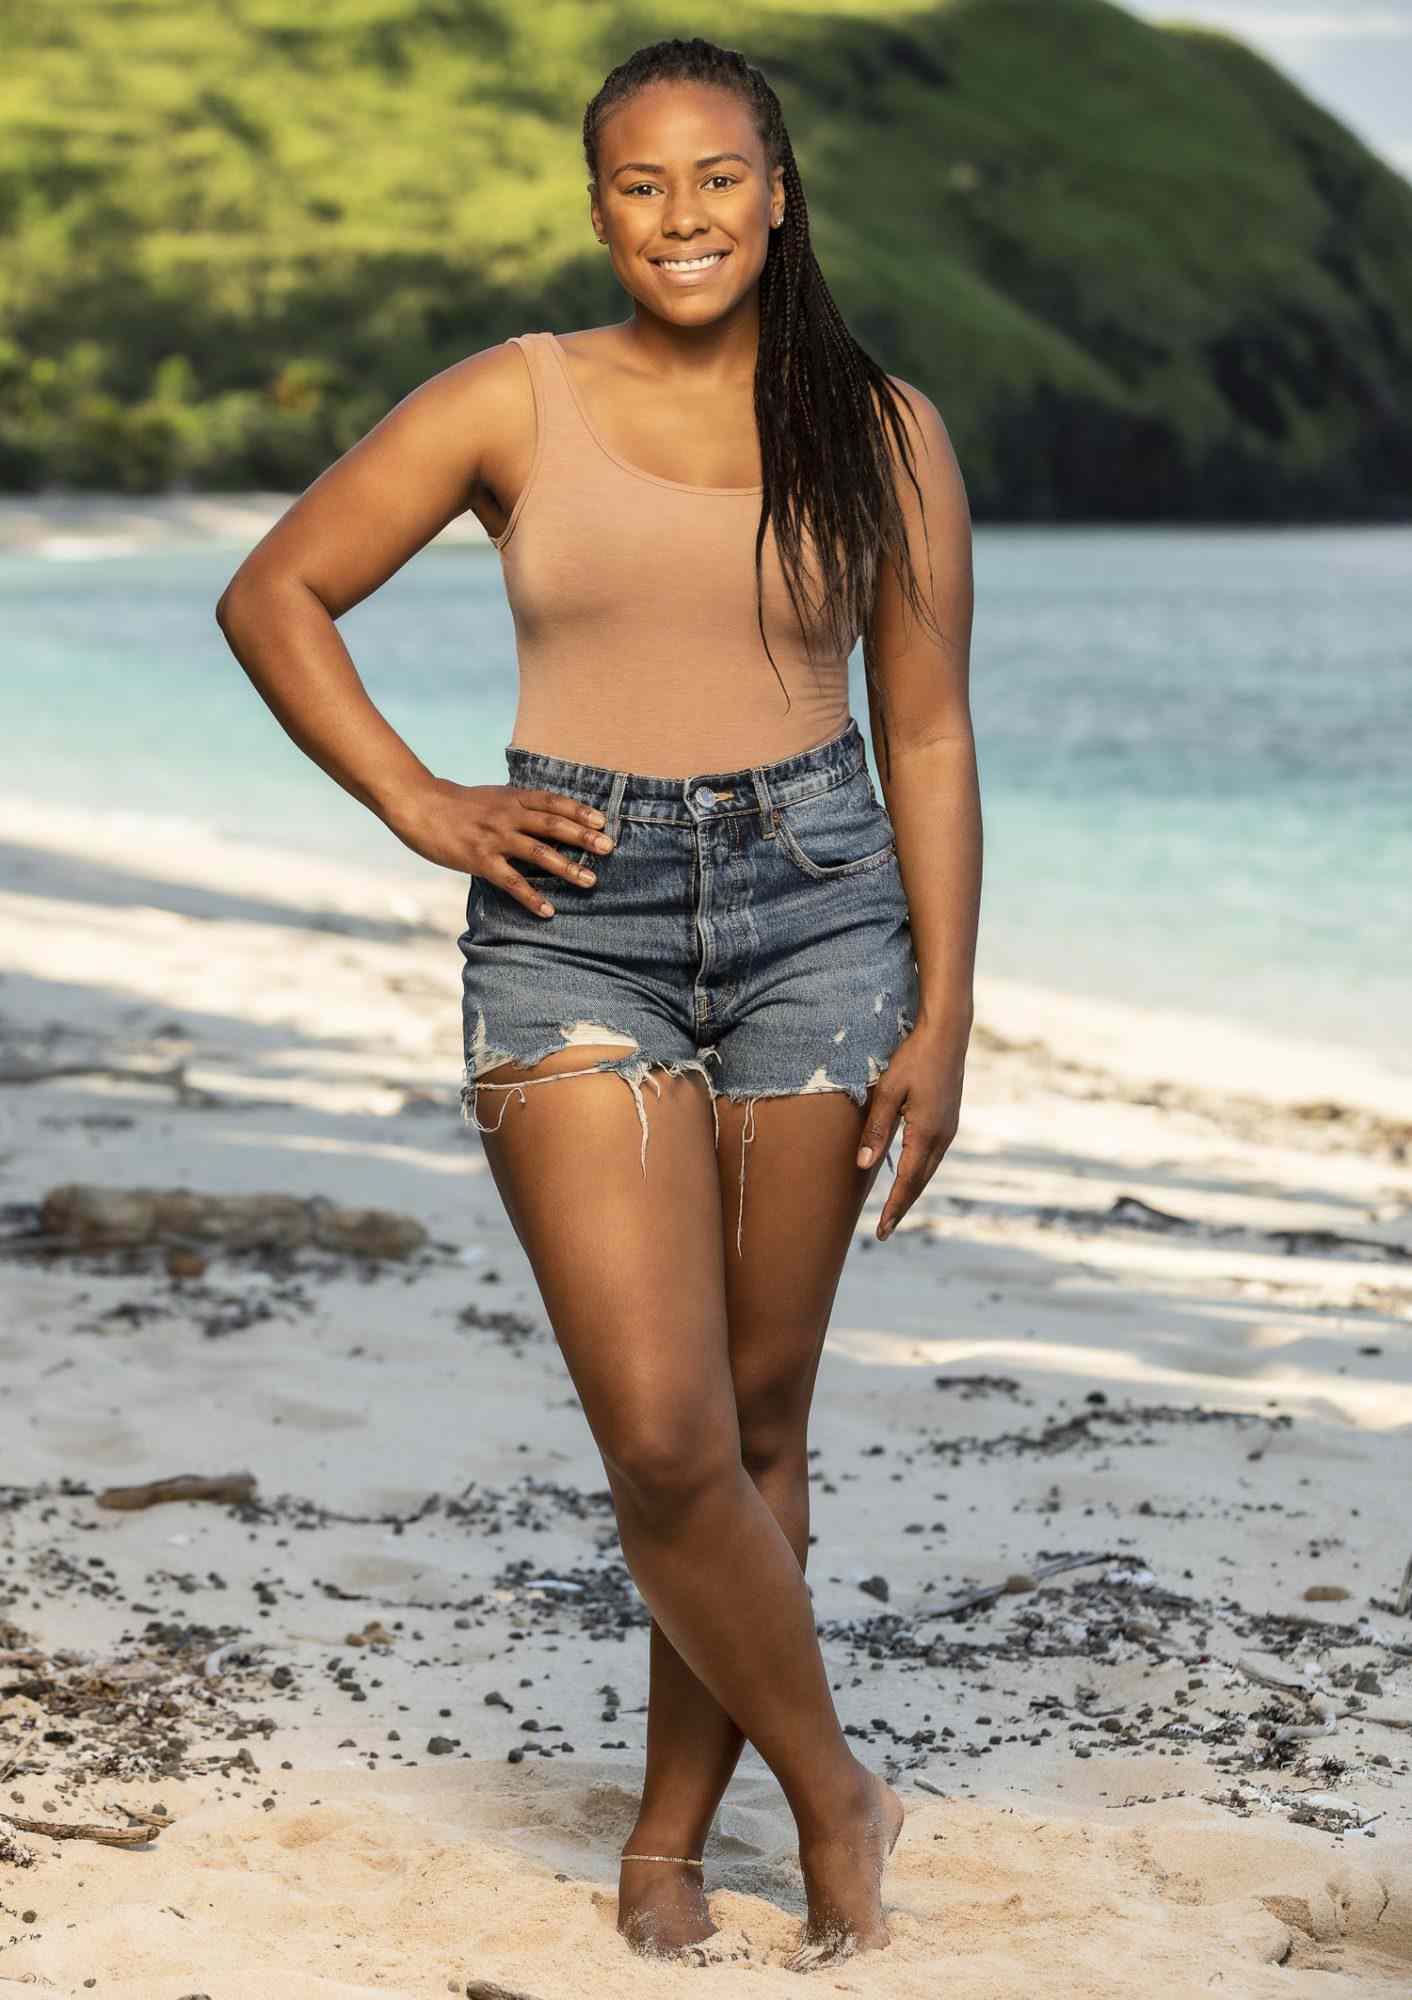 Chanelle Howell from Survivor